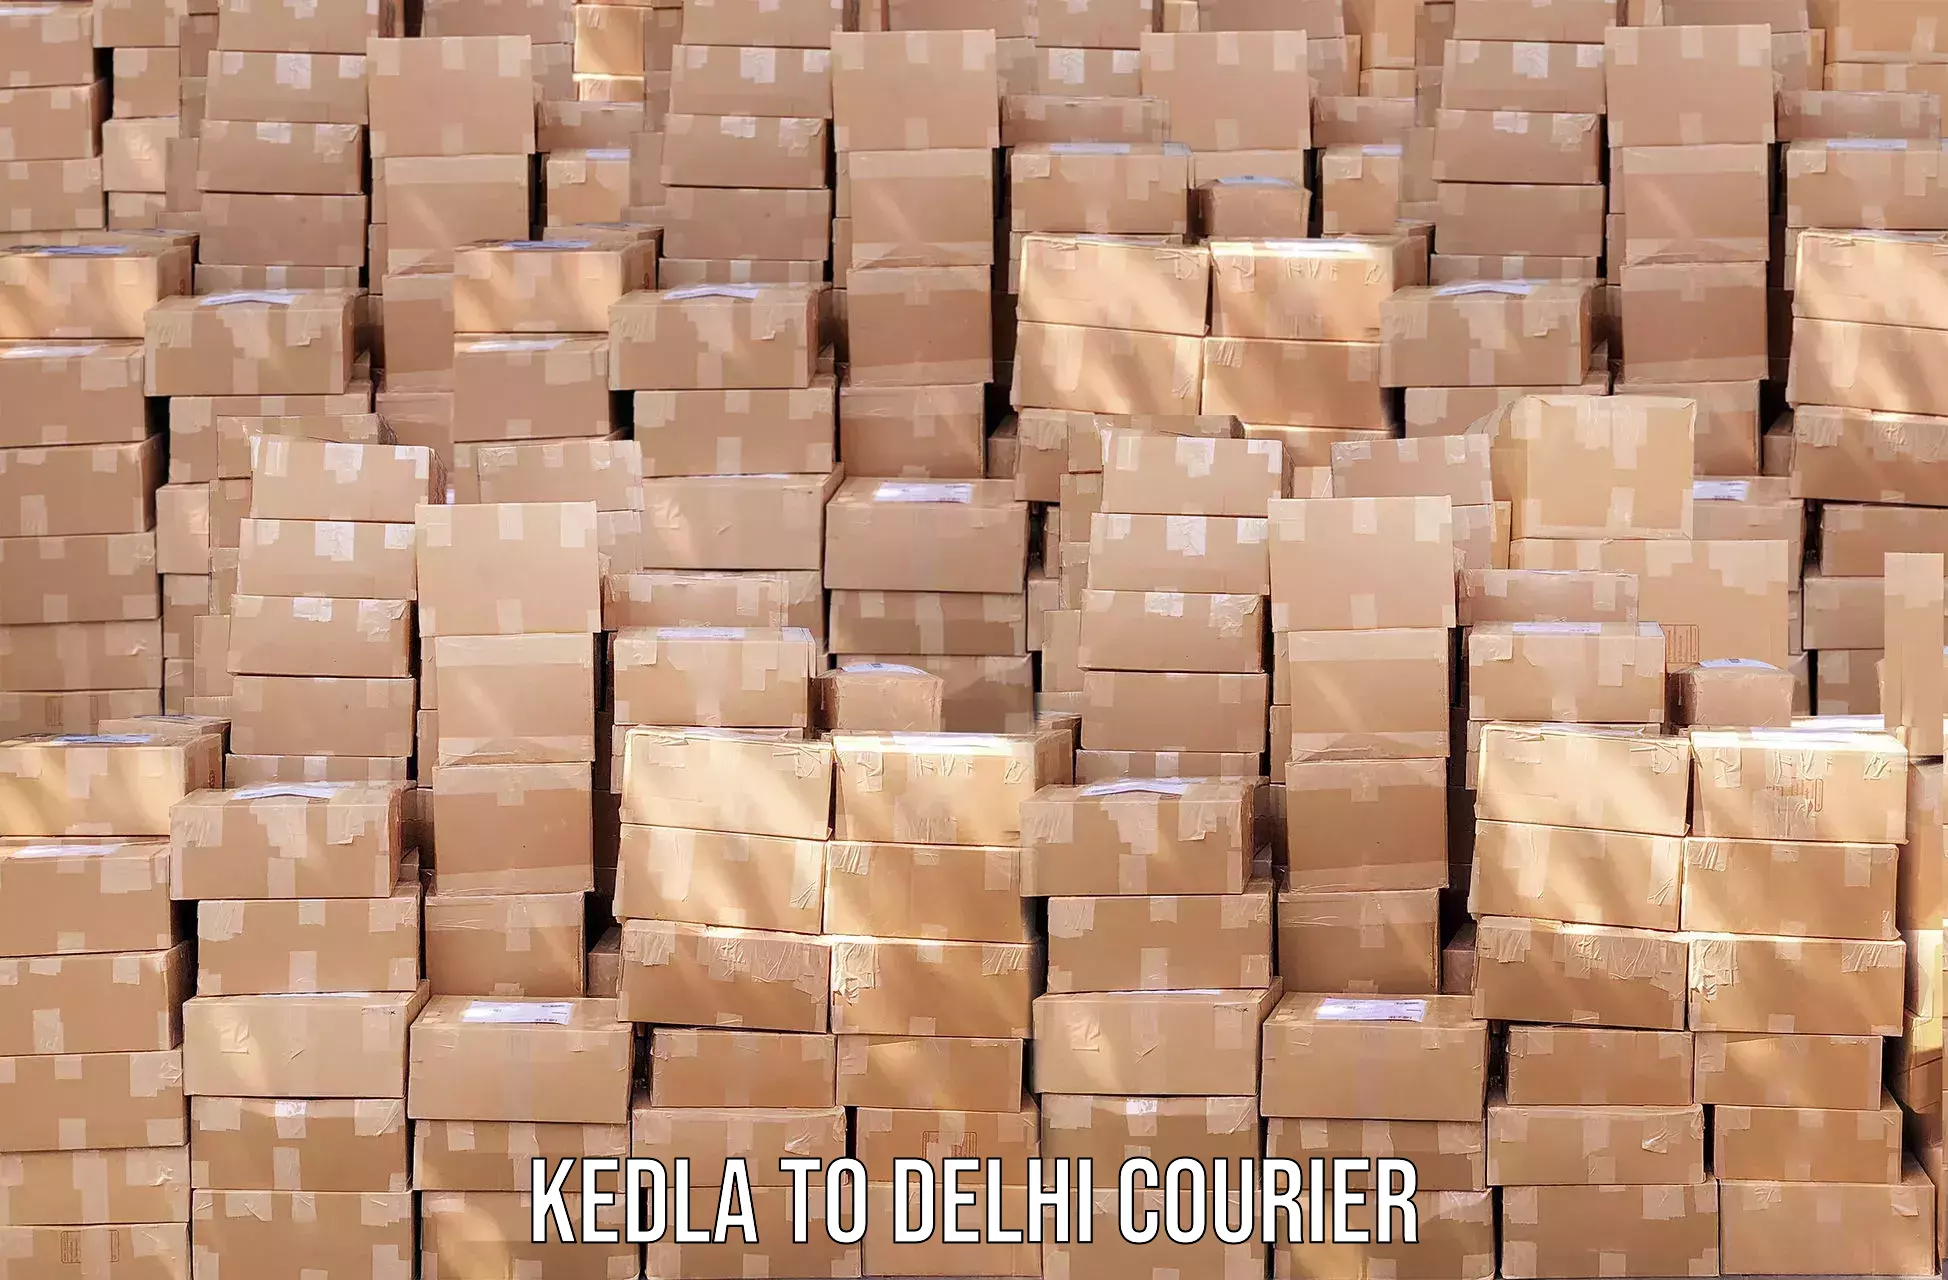 End-to-end delivery Kedla to Delhi